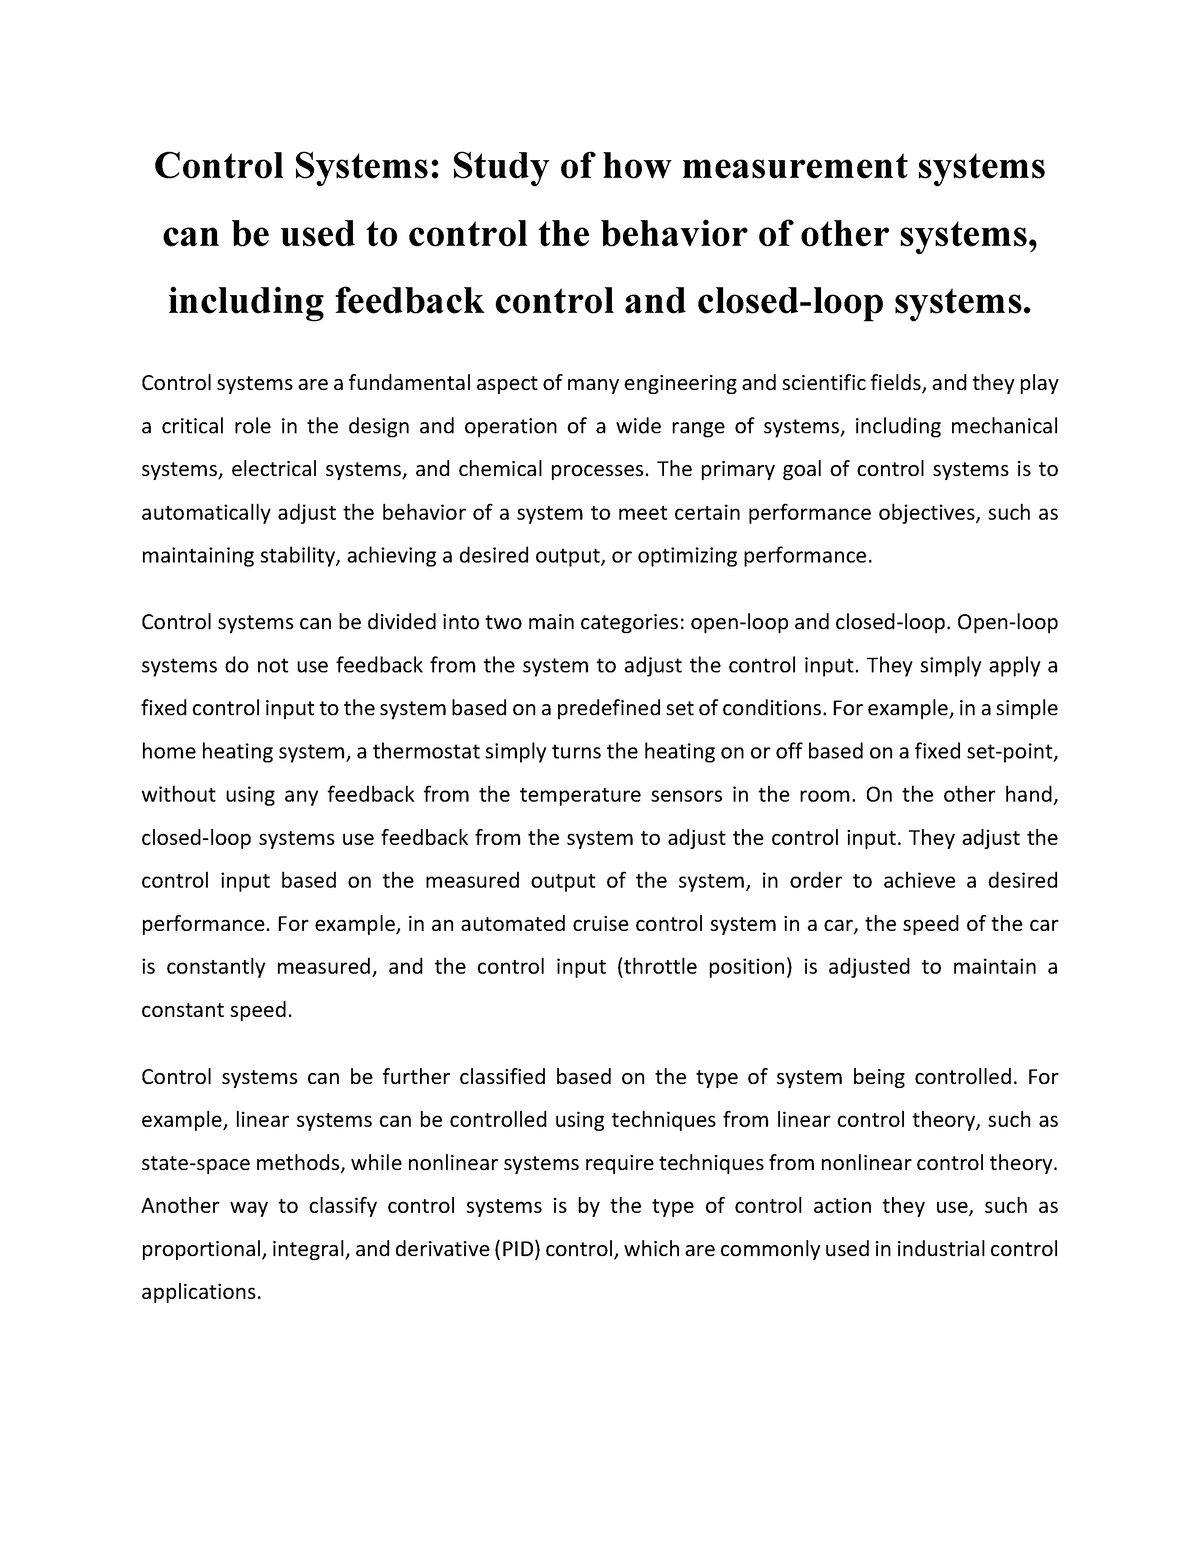 thesis for control system